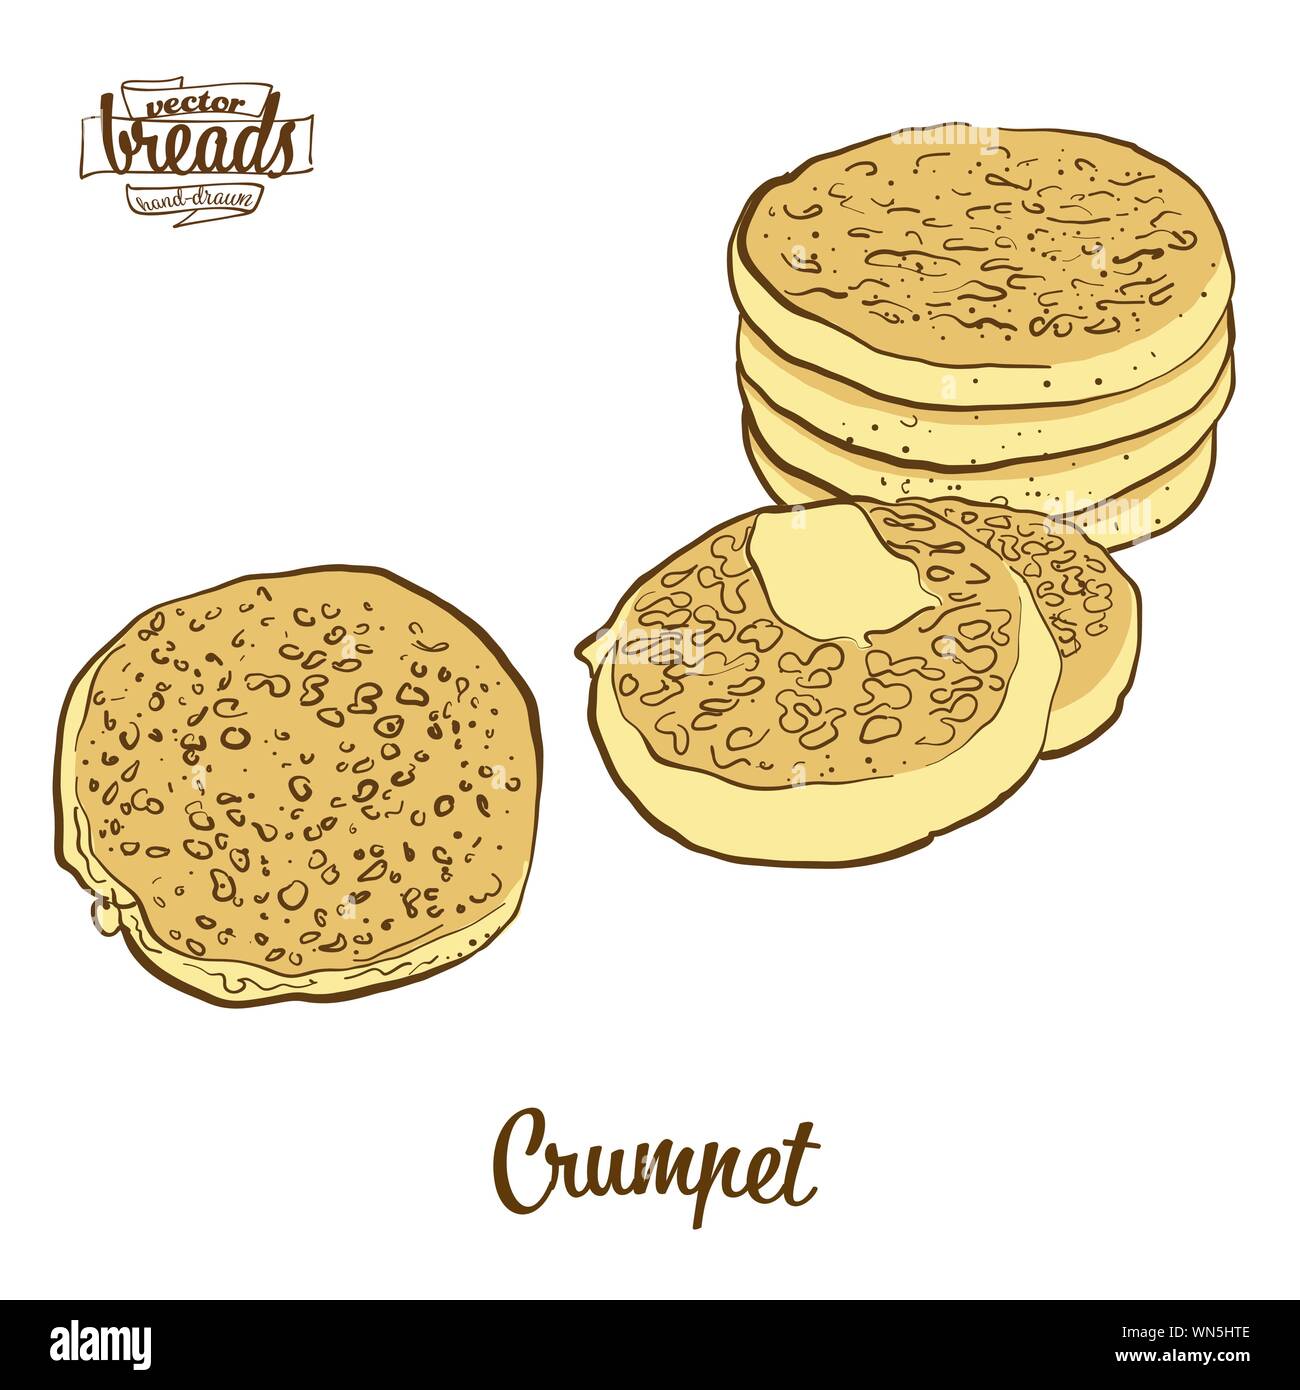 Colored drawing of Crumpet bread. Vector illustration of Flatbread food, usually known in United Kingdom. Colored Bread sketches. Stock Vector